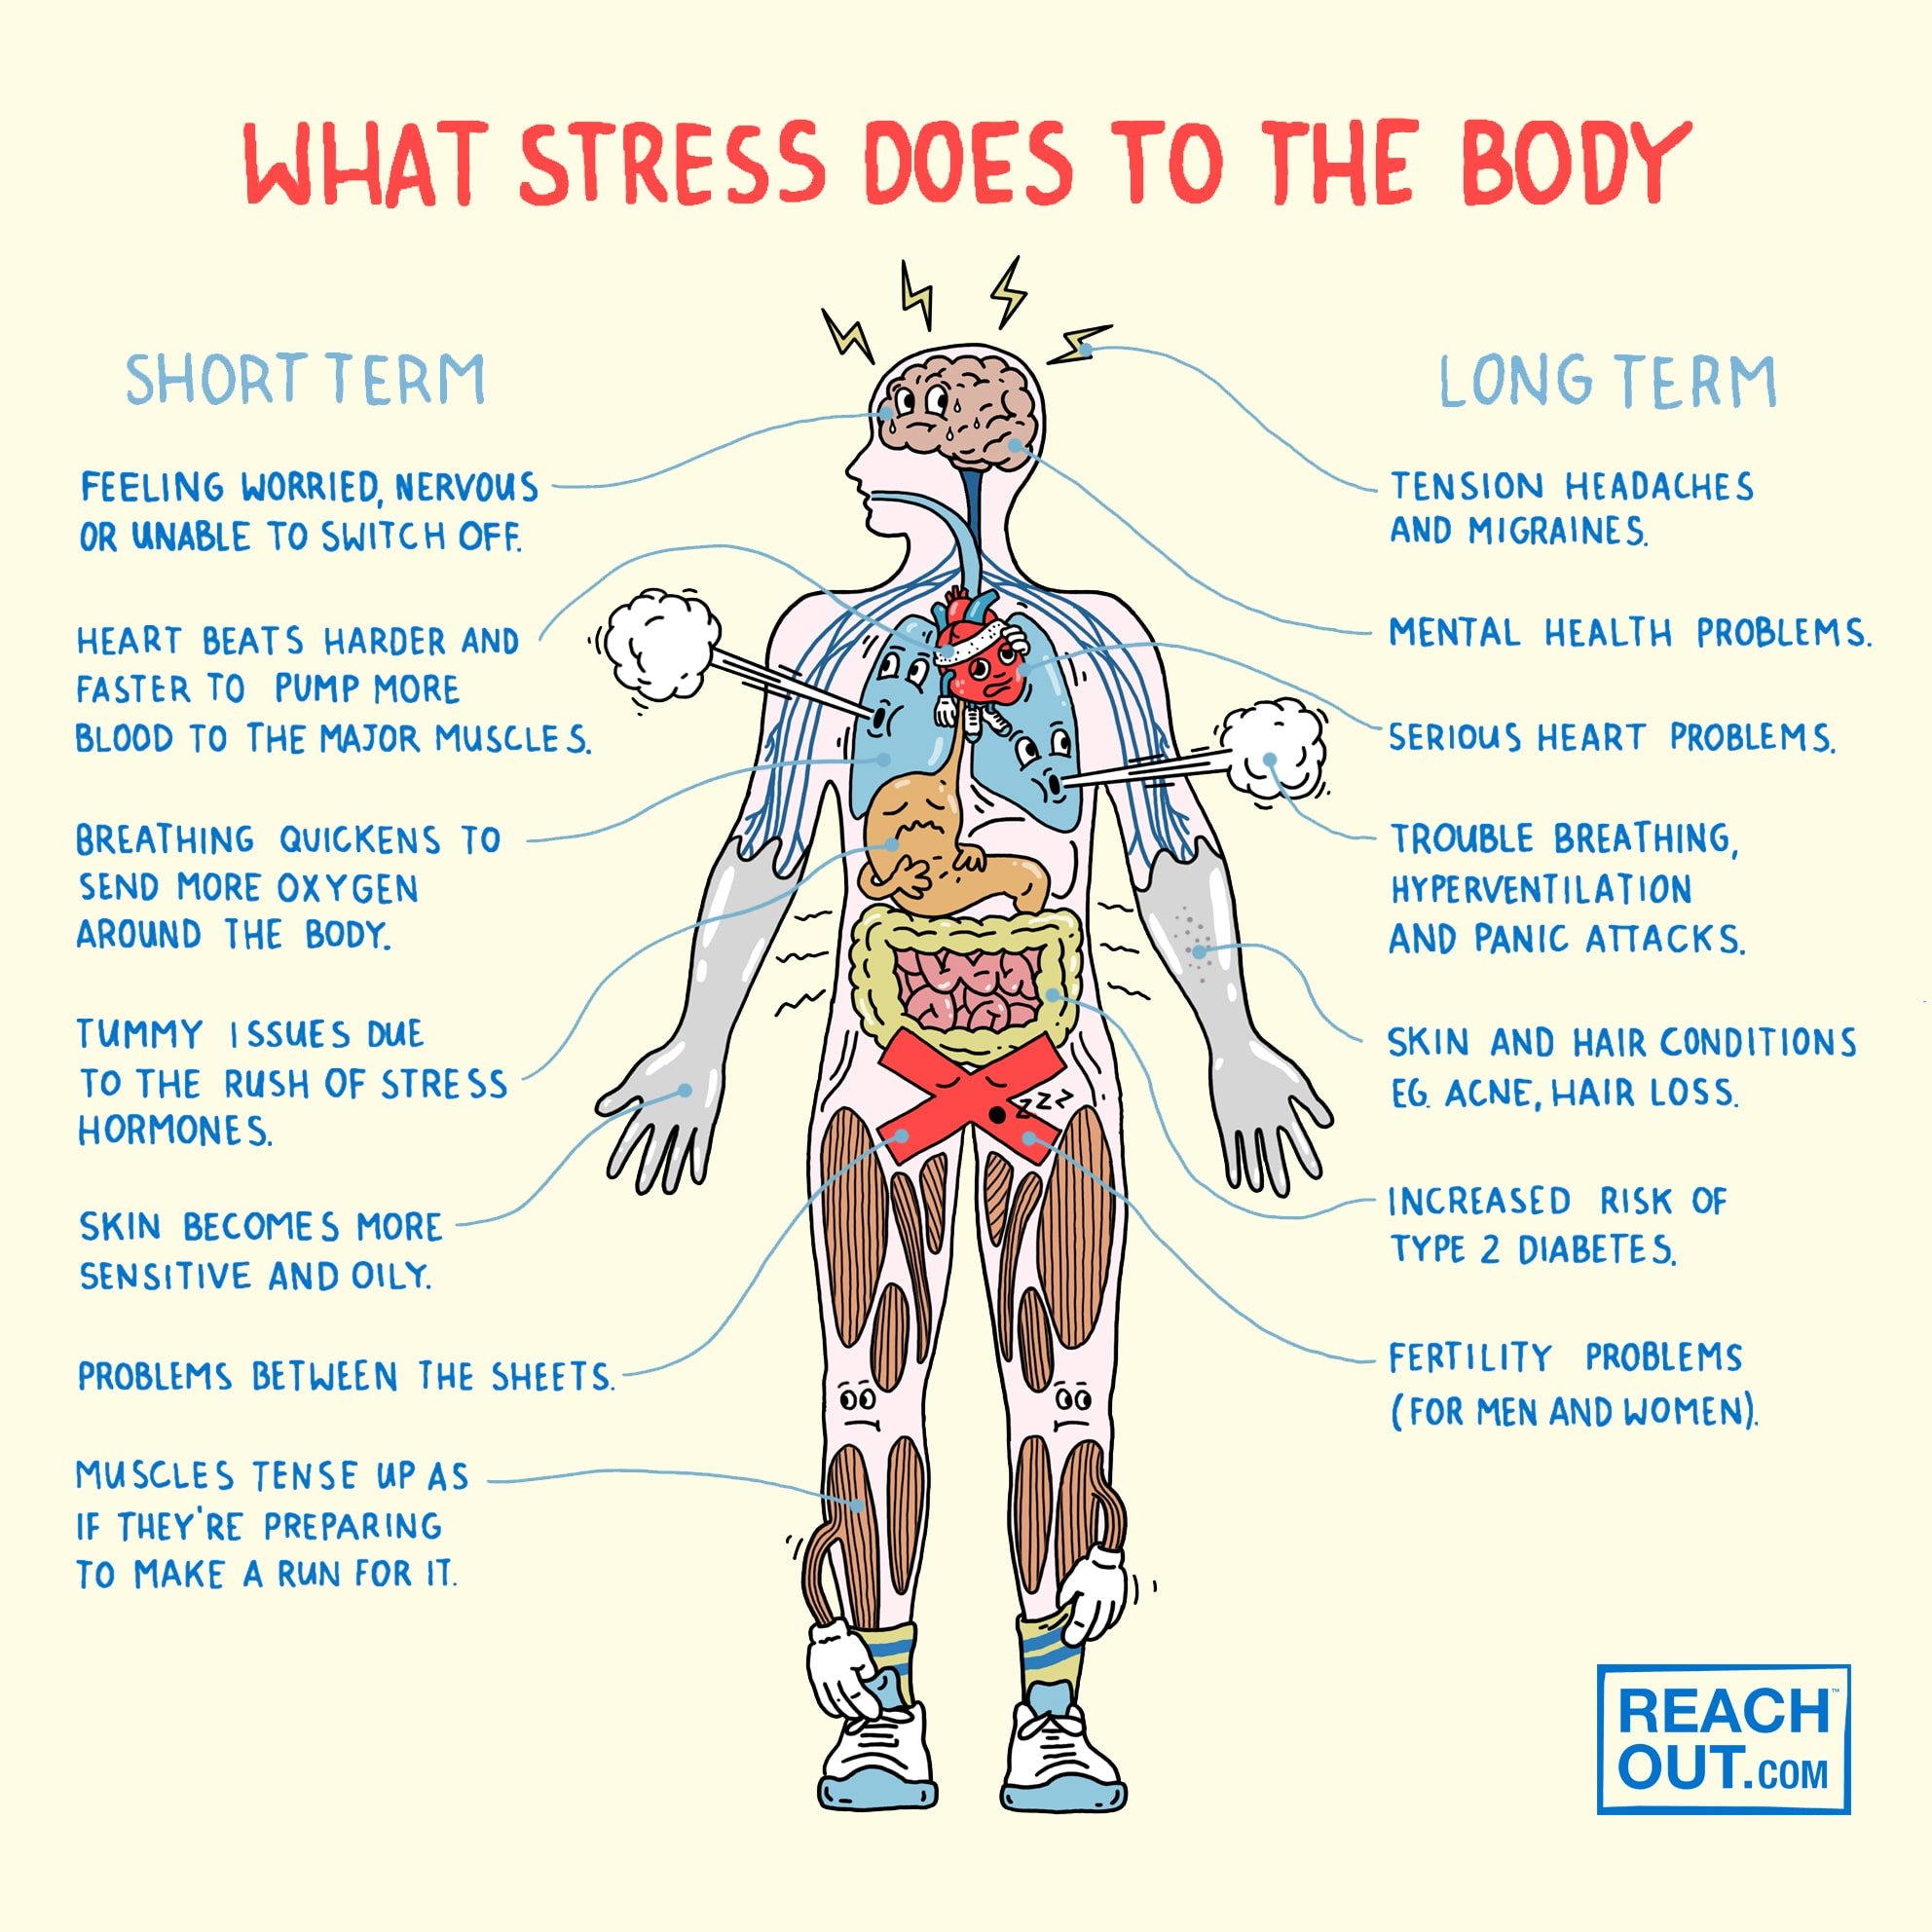 What stress does to the body